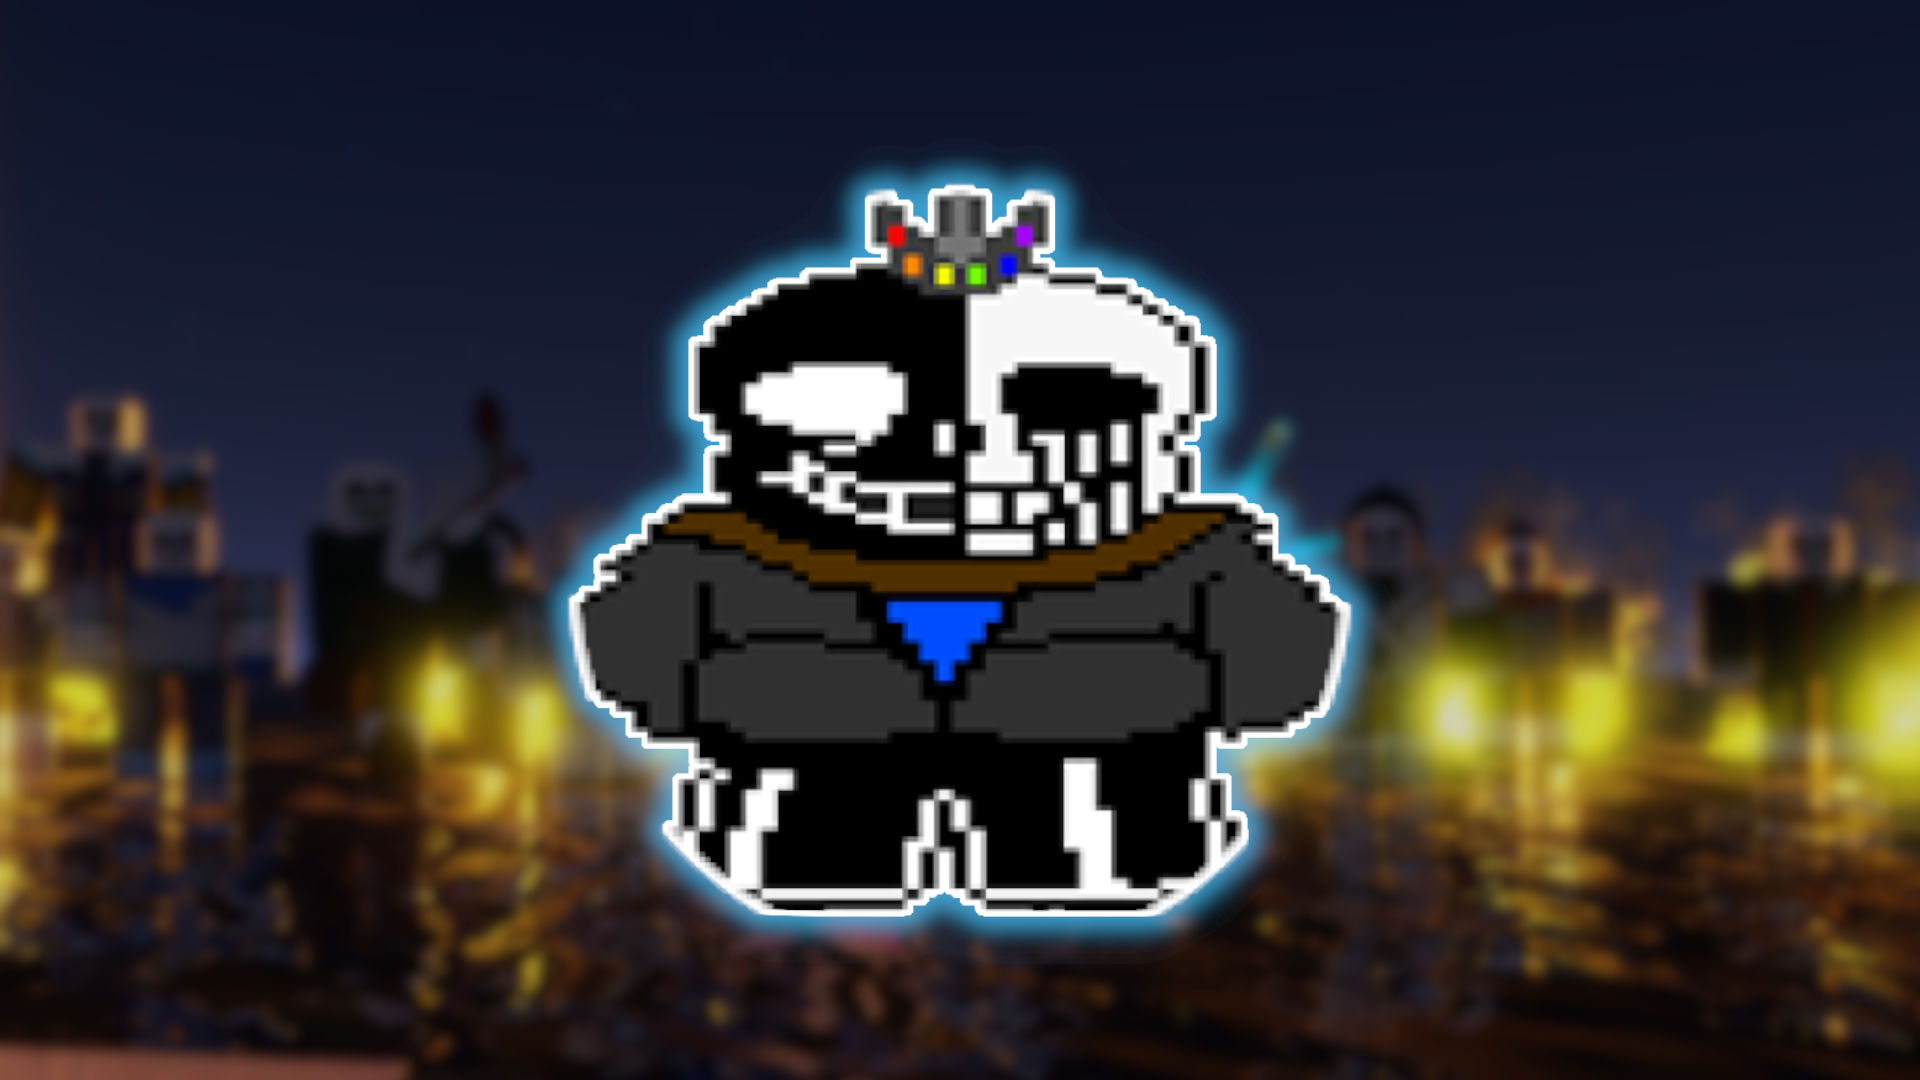 THE ULTIMATE SANS HAS BEEN RELEASED!! Sans Multiverse Simulator 